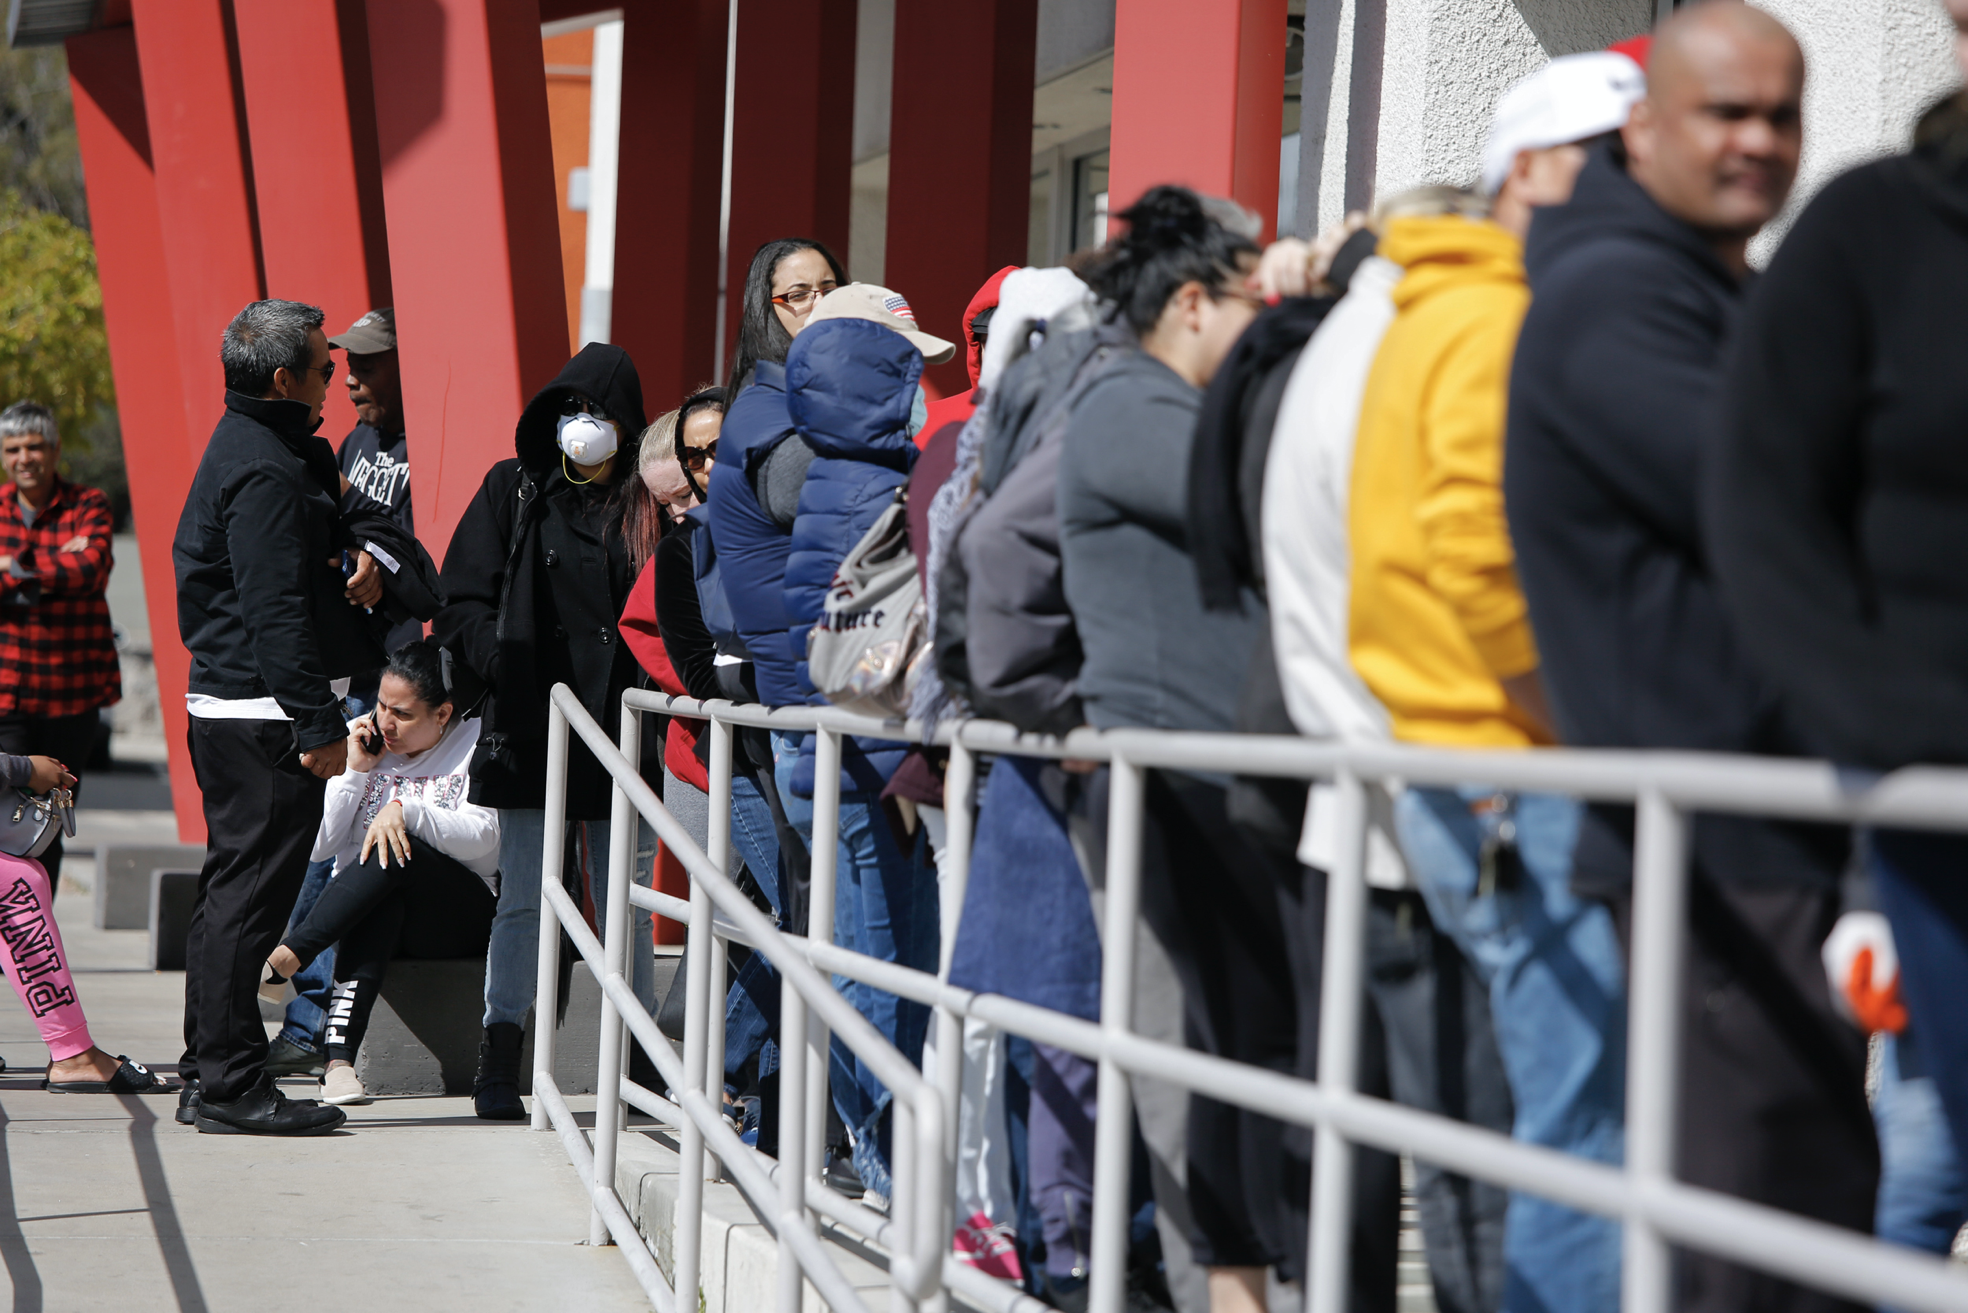 People waiting in line for help with unemployment benefits at the One-Stop Career Center in Las Vegas, Nevada. (Source)